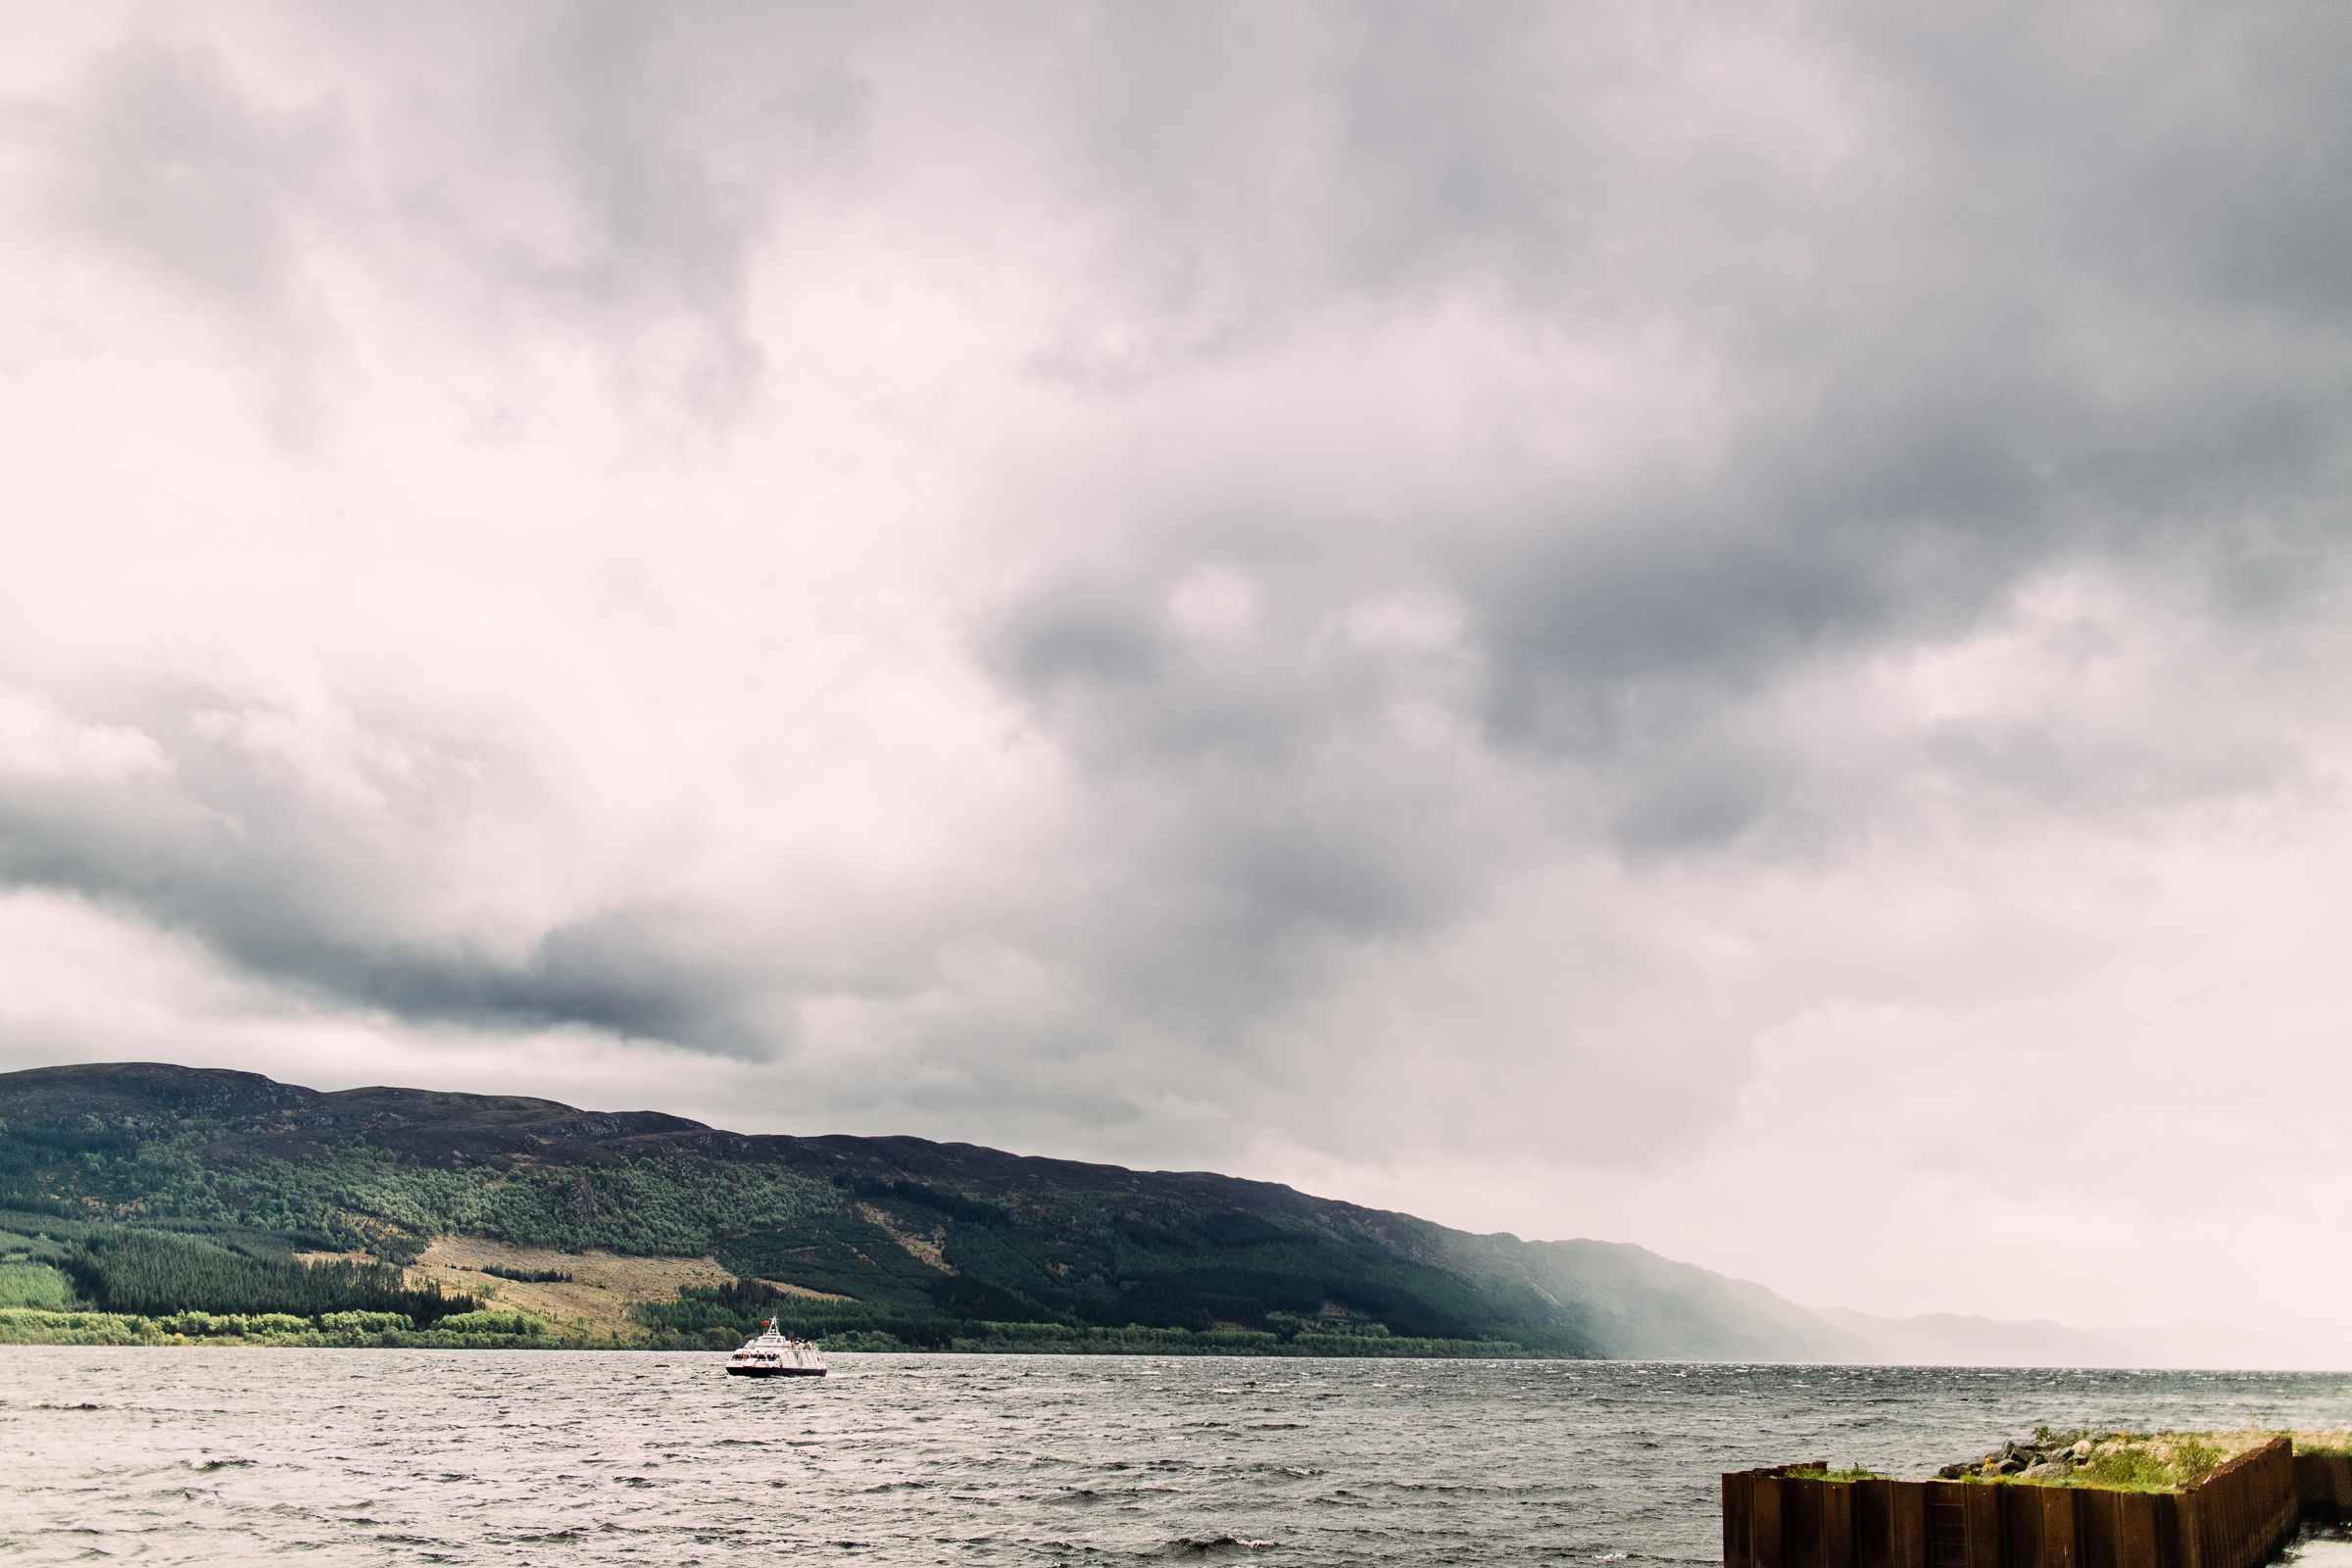  Fog and mist coming in over Loch Ness. Just beautiful. 